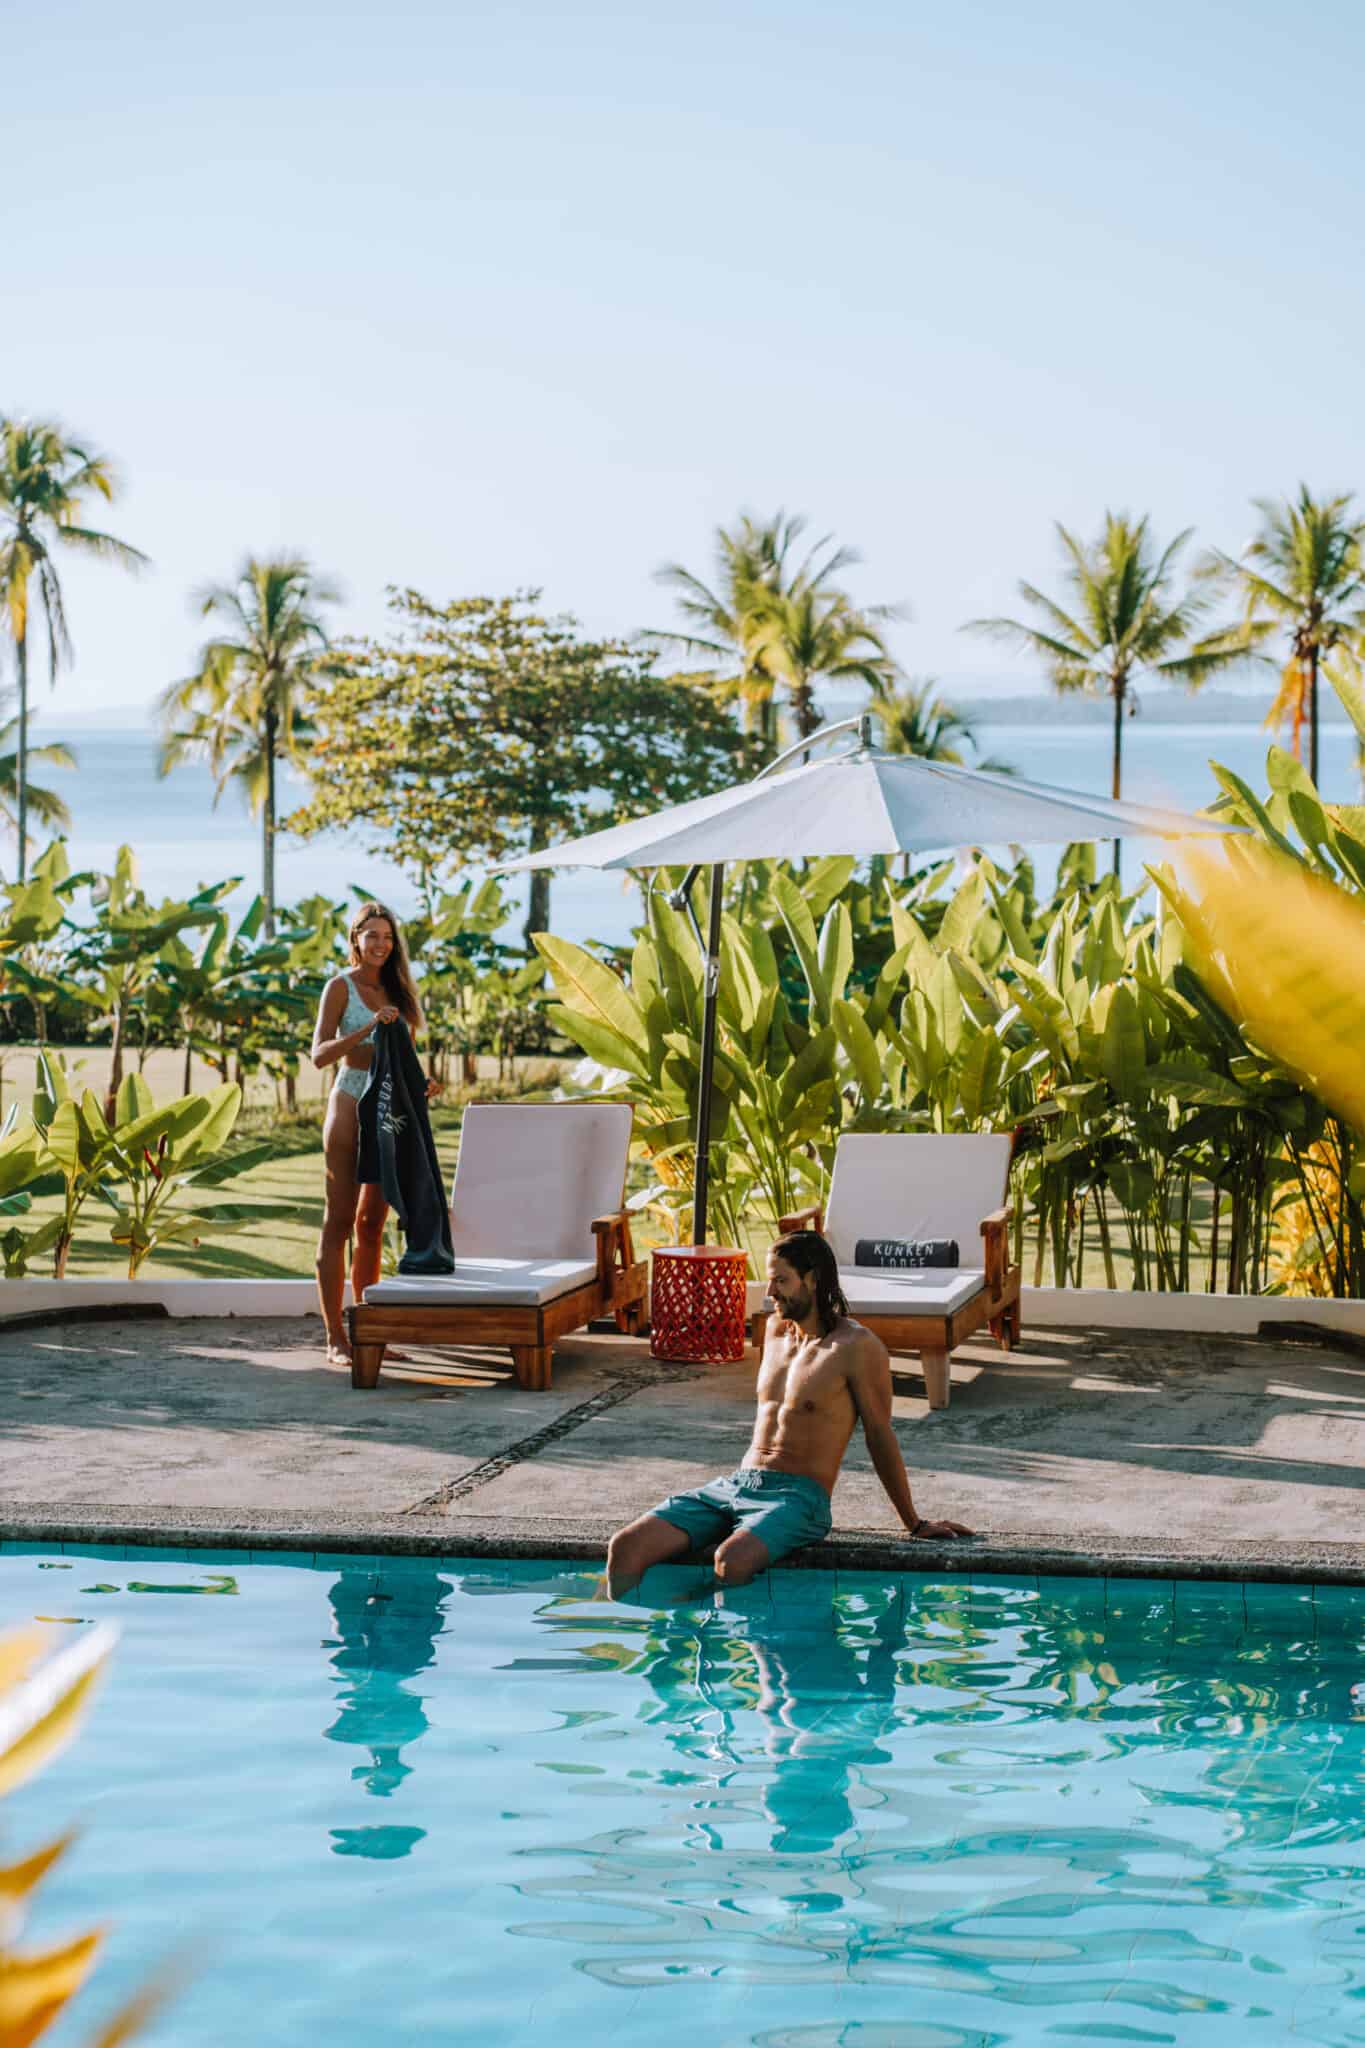 Two people sitting in a pool with palm trees in the background, inviting you to work with us.